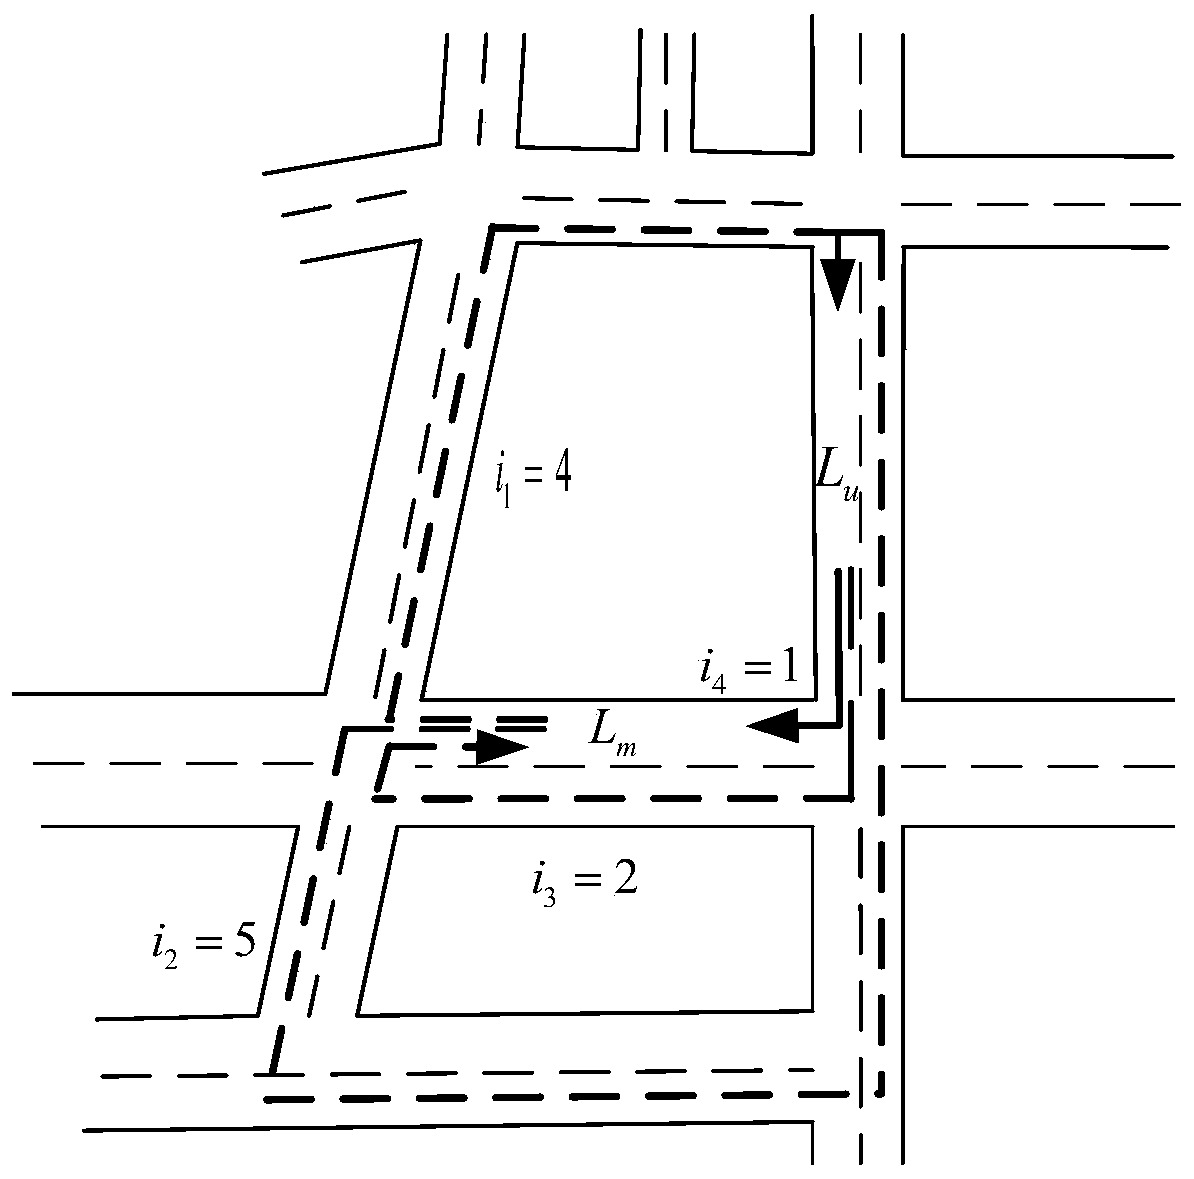 Urban traffic road section speed prediction method and system based on multi-road-section space-time correlation